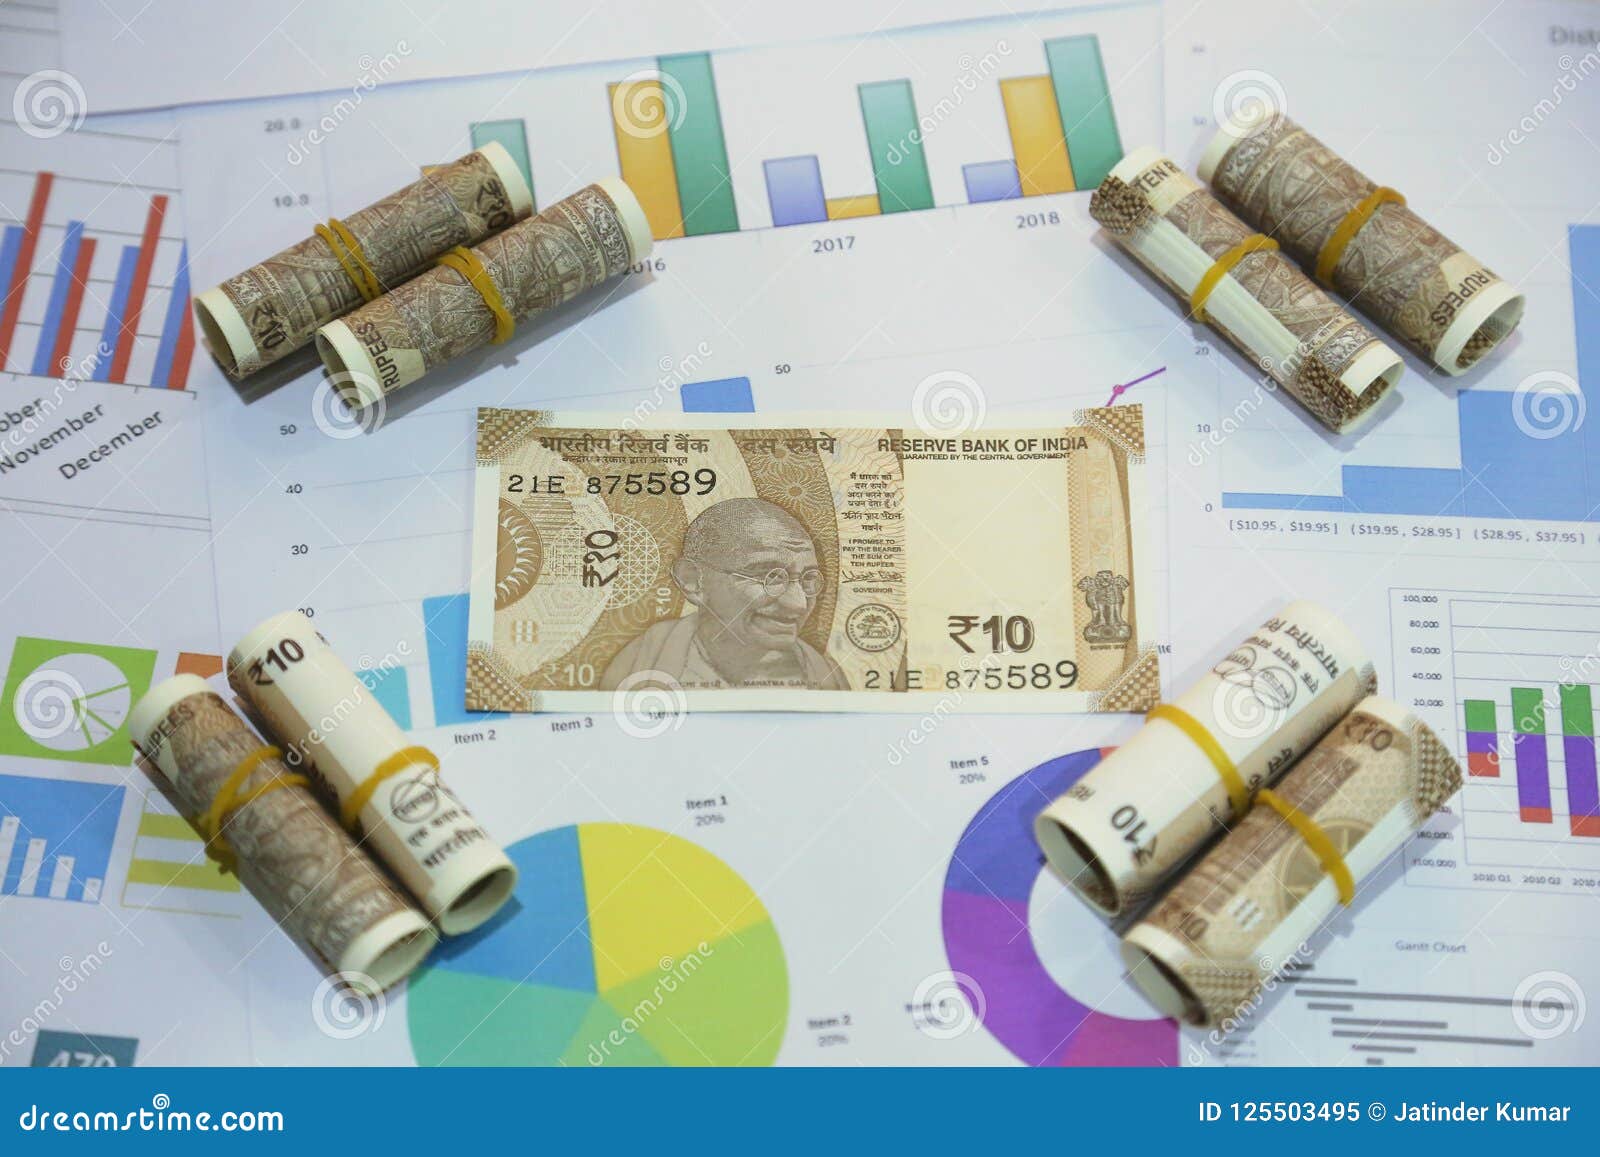 Rupee Currency Chart